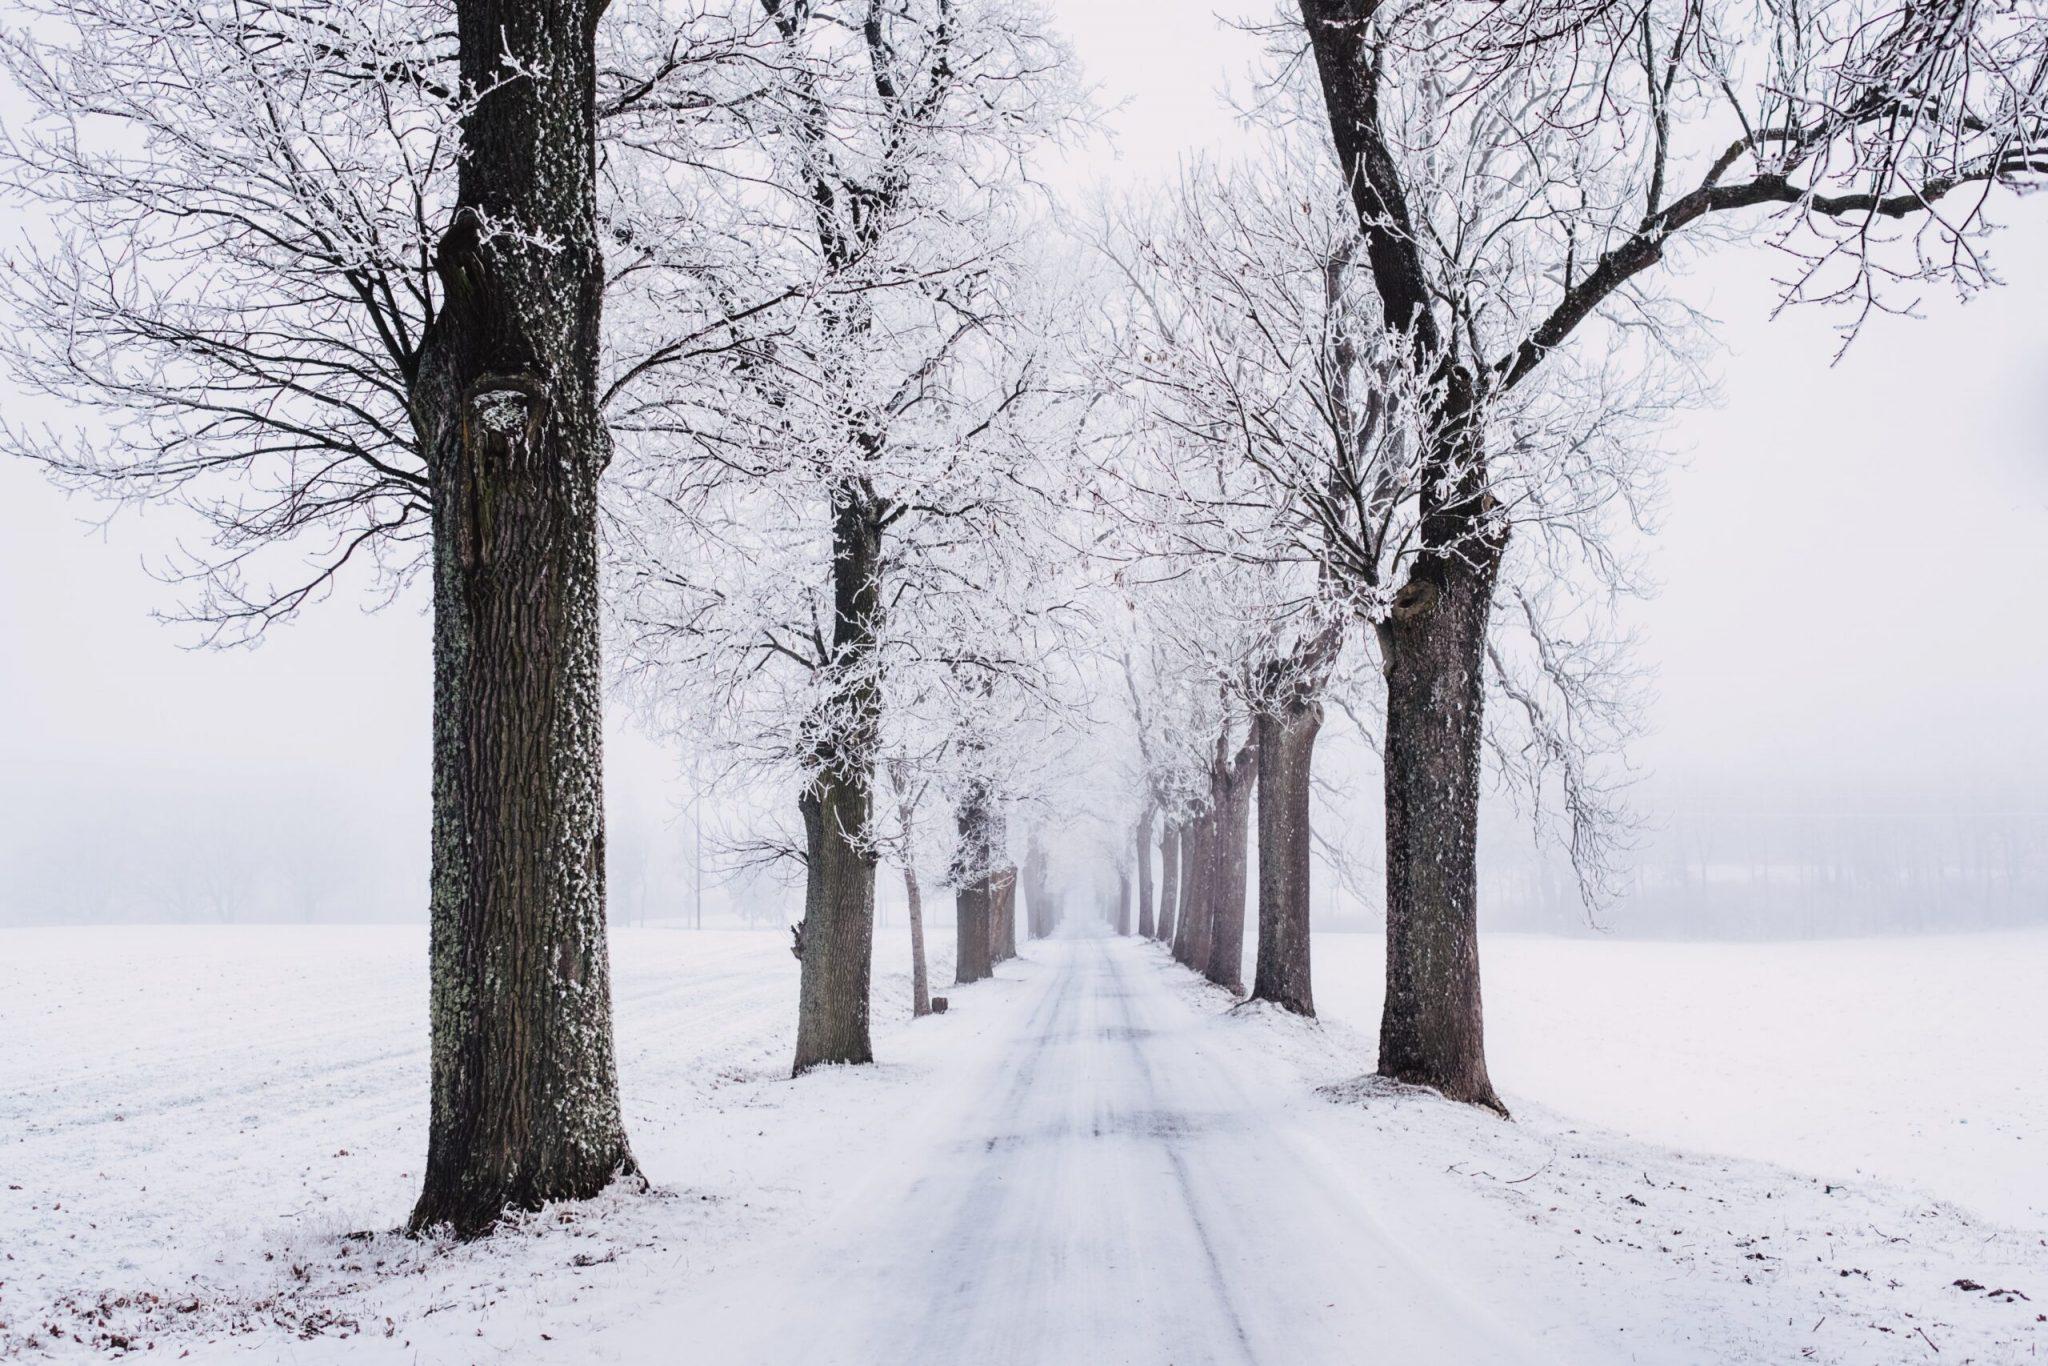 Snowy pathway surrounded by bare trees